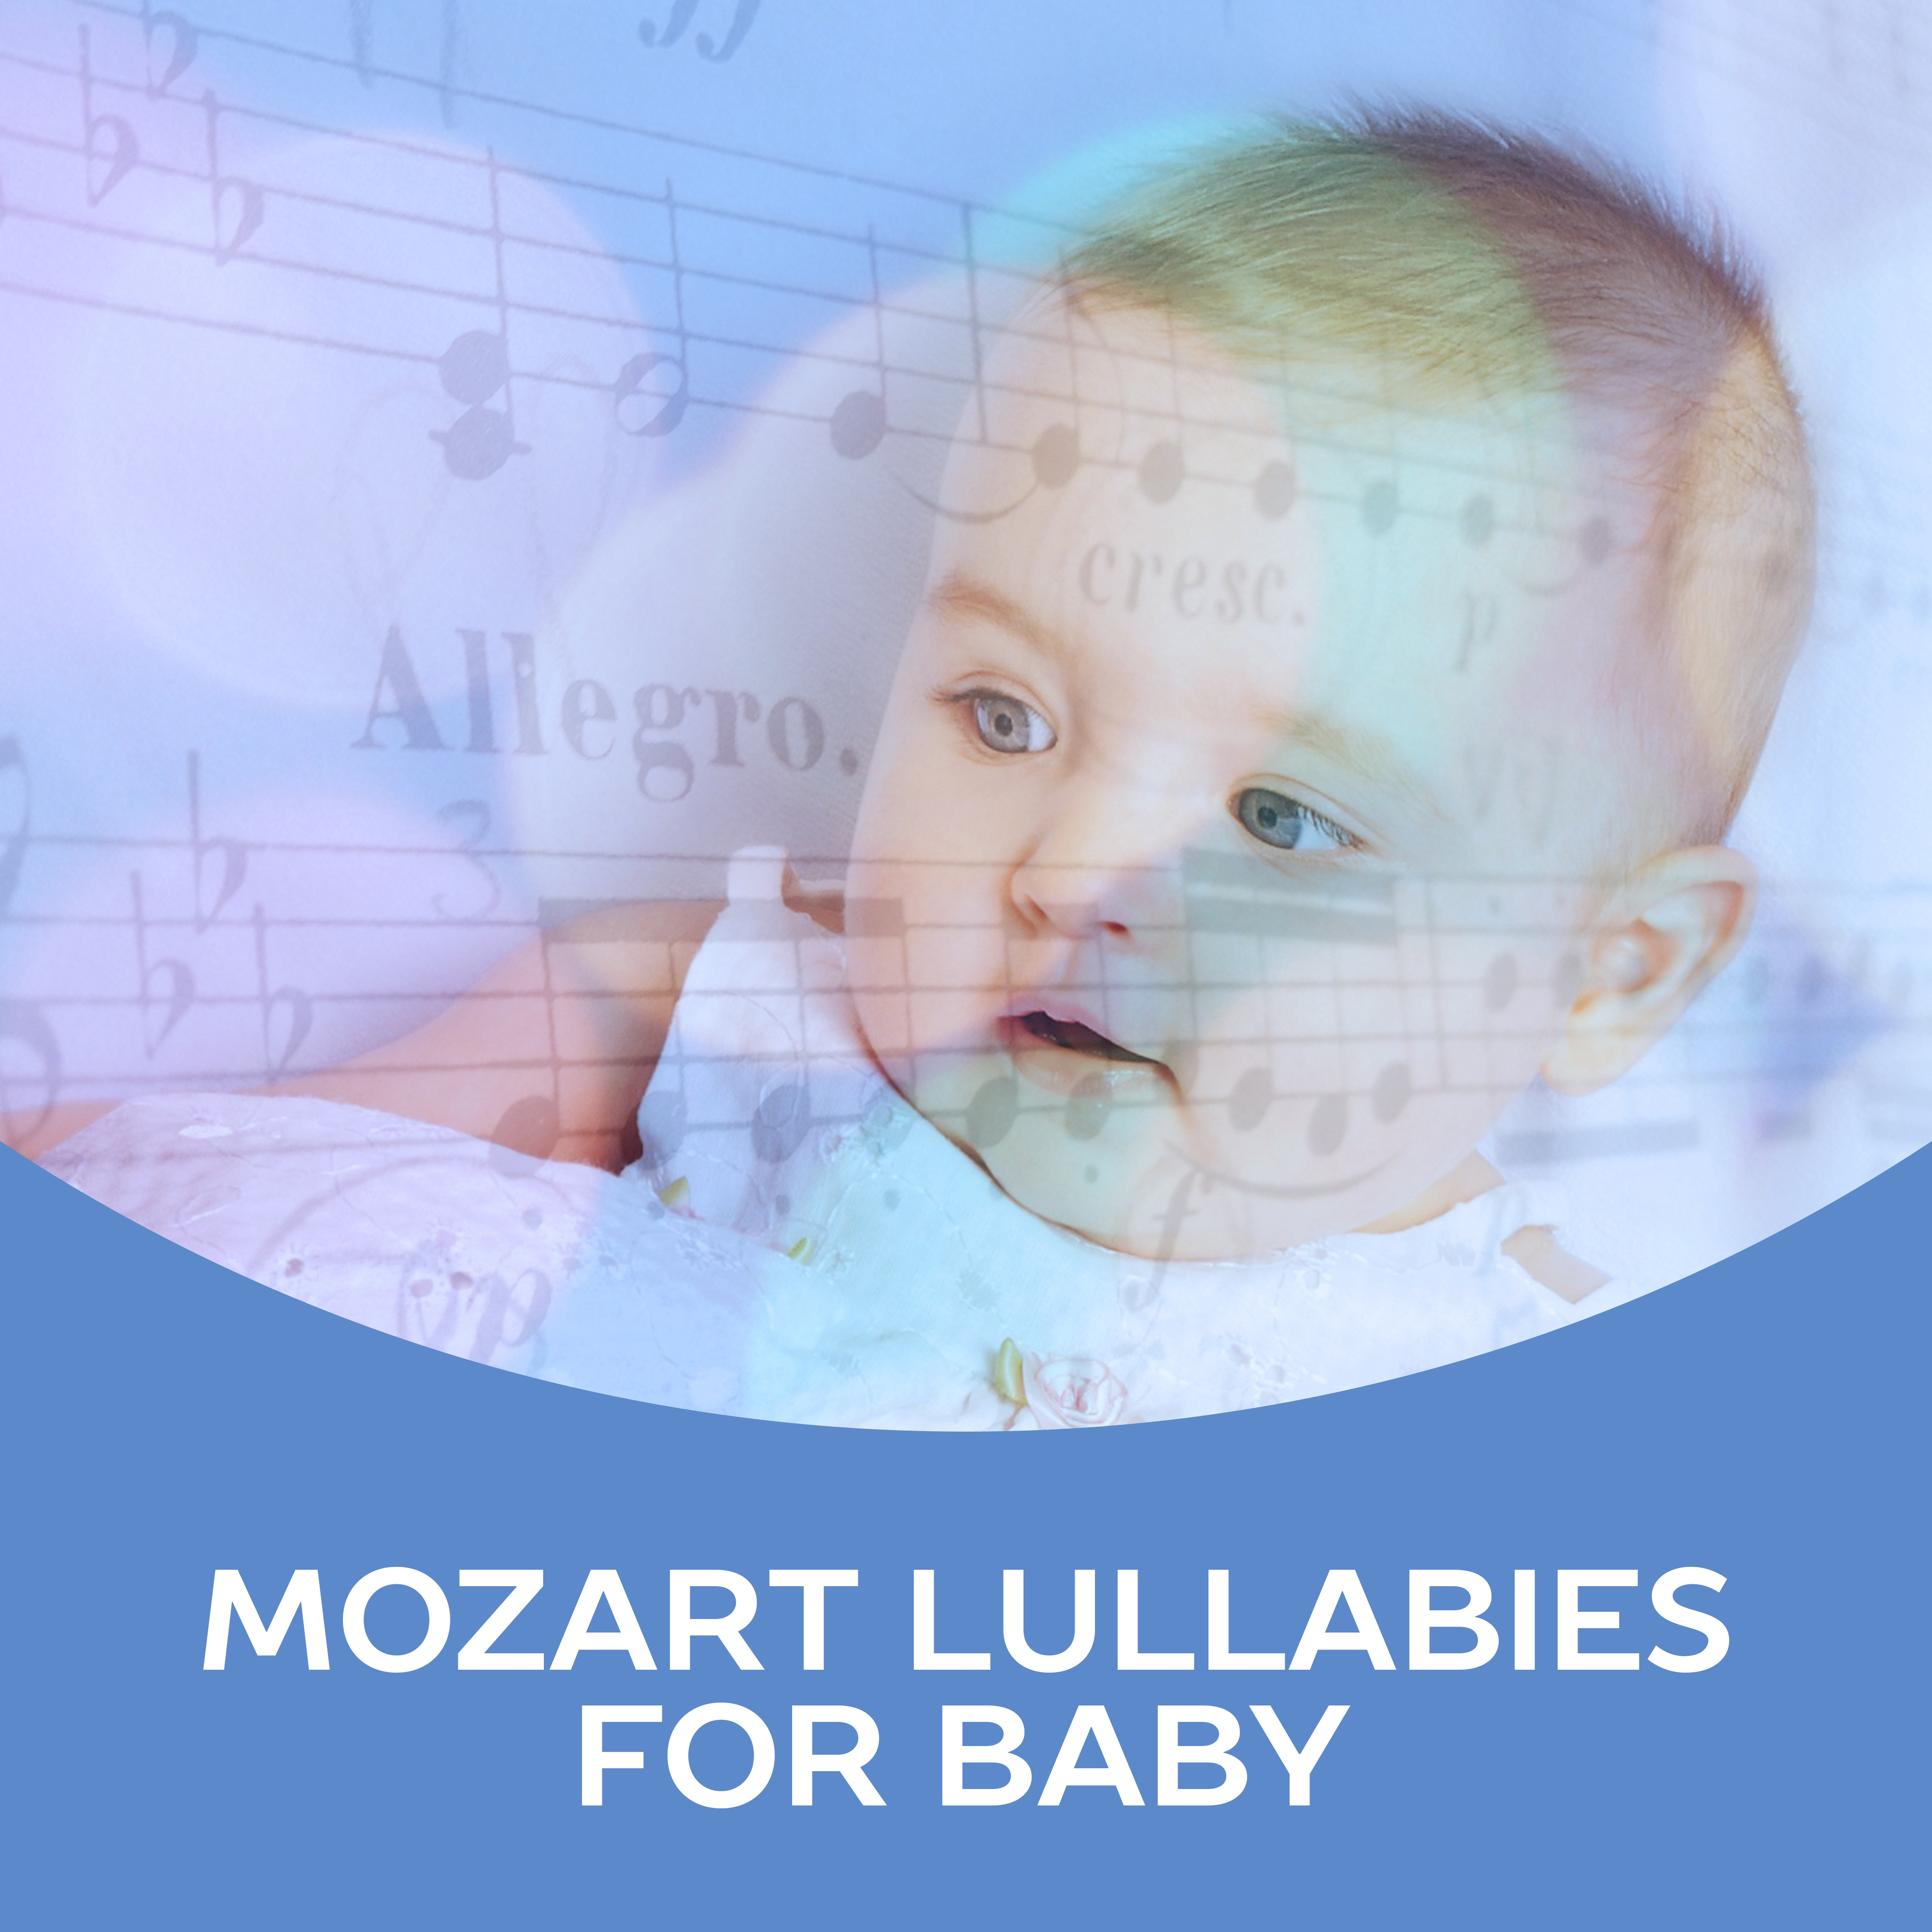 Mozart Lullabies For Baby  Classical Lullabies for Babies, Peaceful Piano, Calm Night, Baby Healthy Development